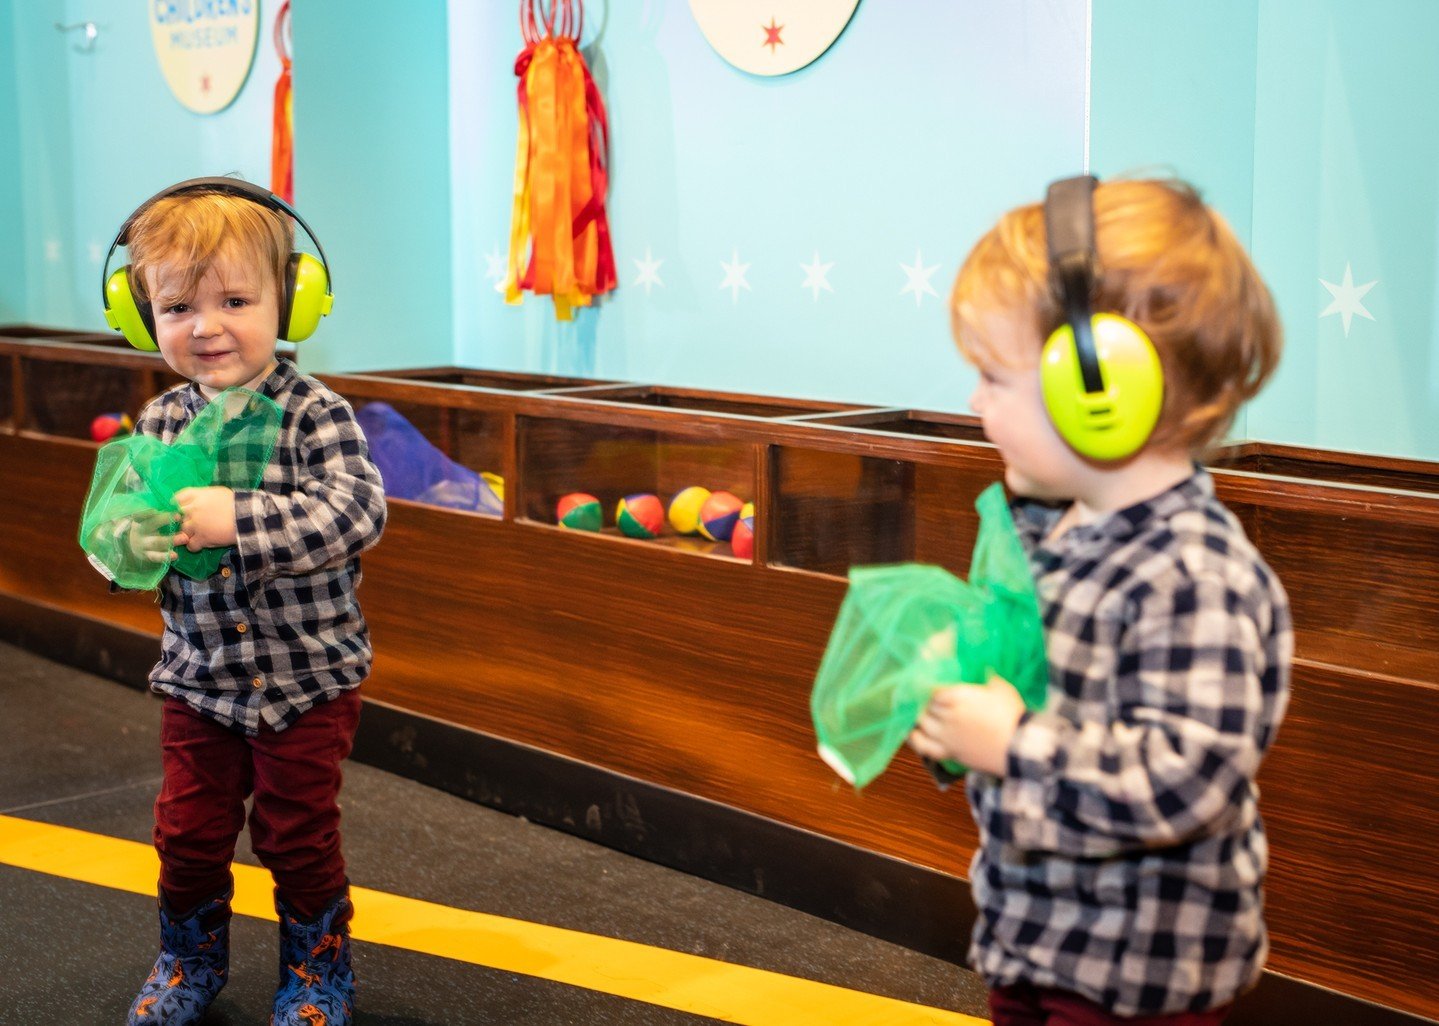 Don't forget to register for Play For All at 📍 Chicago Children's Museum on 📆 Saturday, June 1!

Play For All invites children and families with disabilities and Chicago Children&rsquo;s Museum members to experience the museum's inclusive, multisen